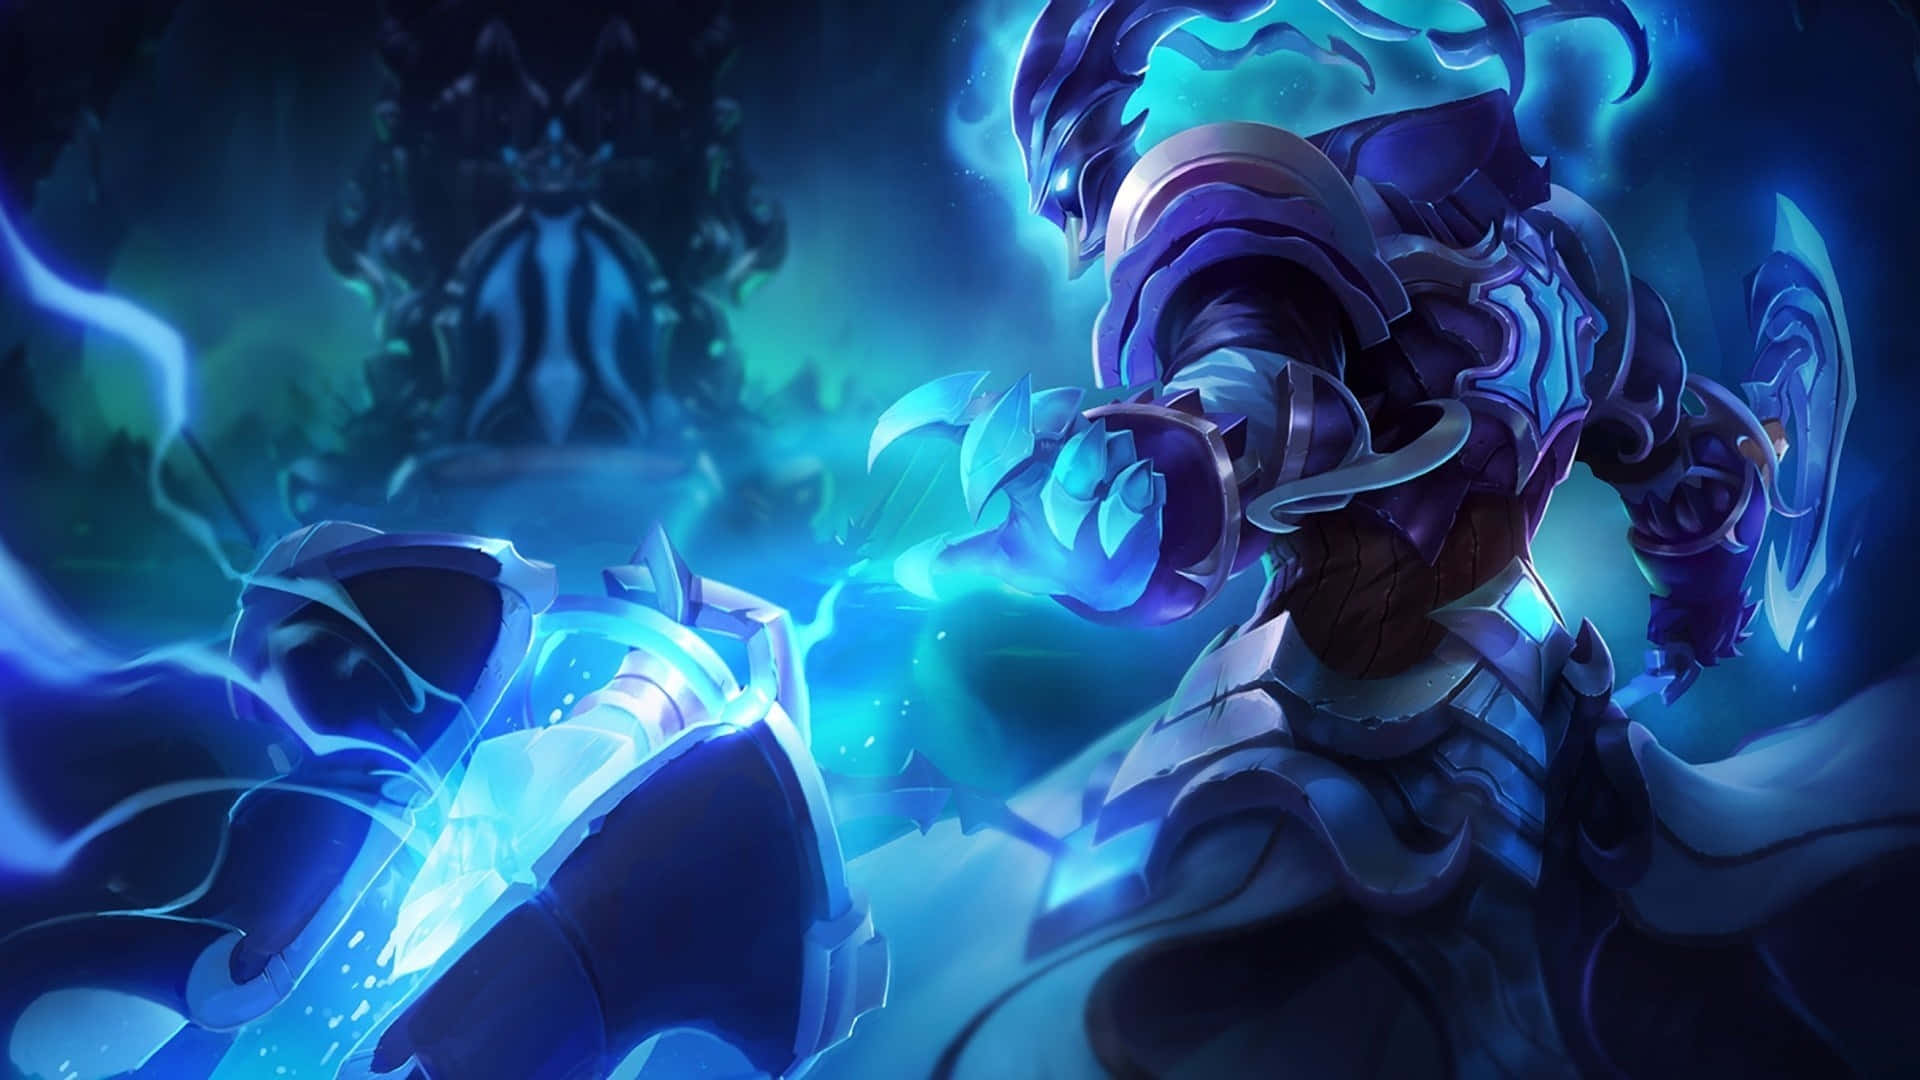 Explore the world of League Of Legends in high-def at 1920 x 1080